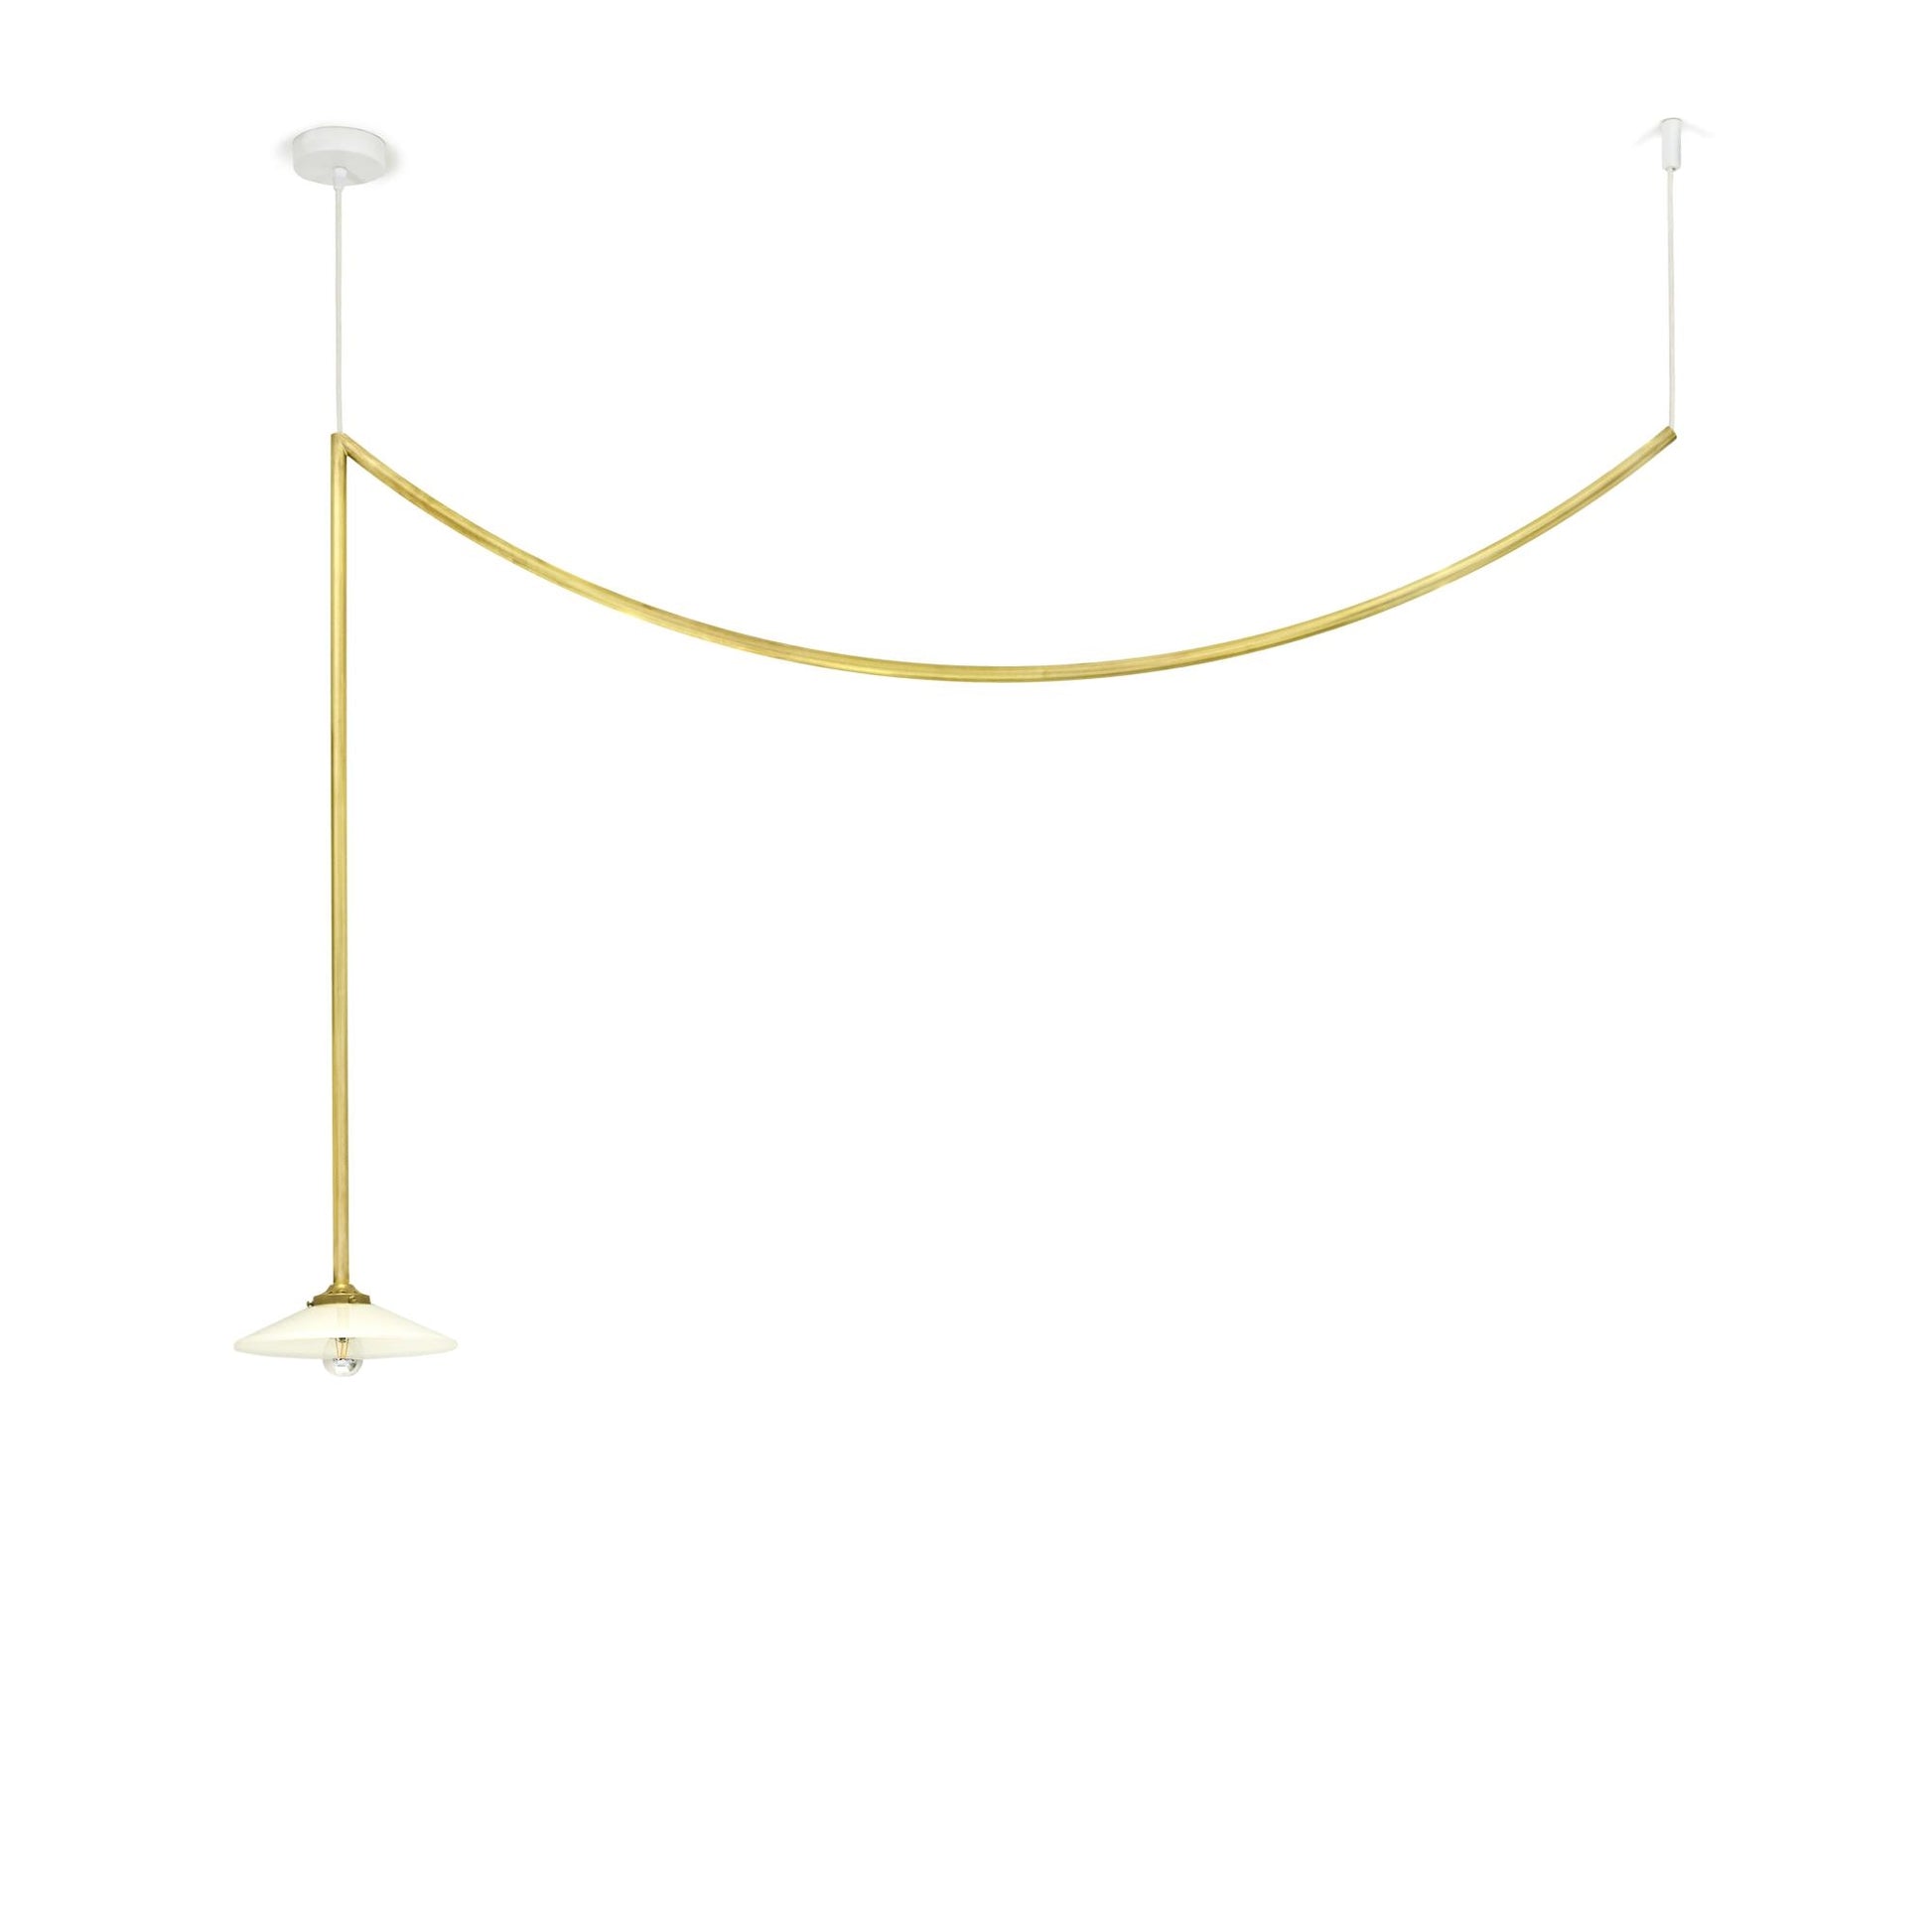 Ceiling Lamp N°4 Ceiling Light by Valerie Objects #Brass